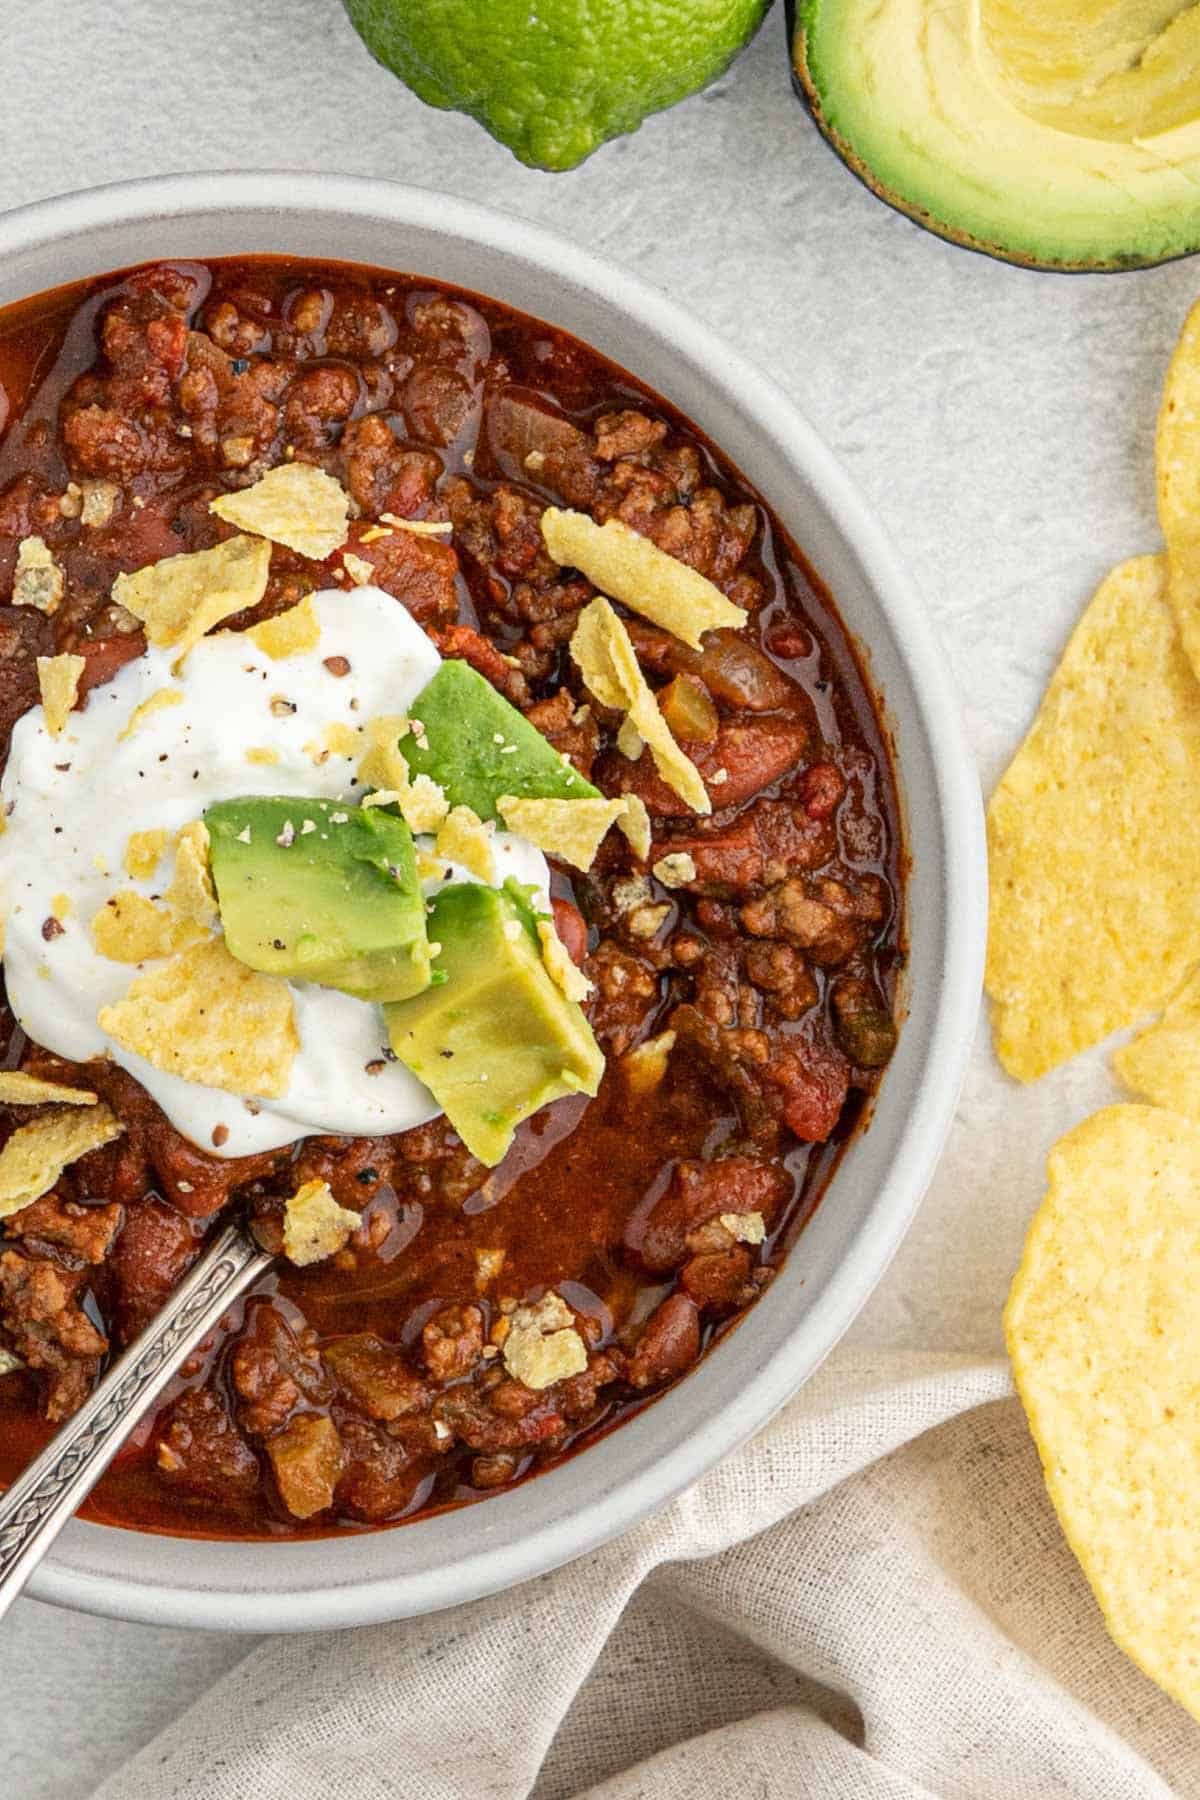 A half a bowl of chili on the table topped with sour cream and avocado.